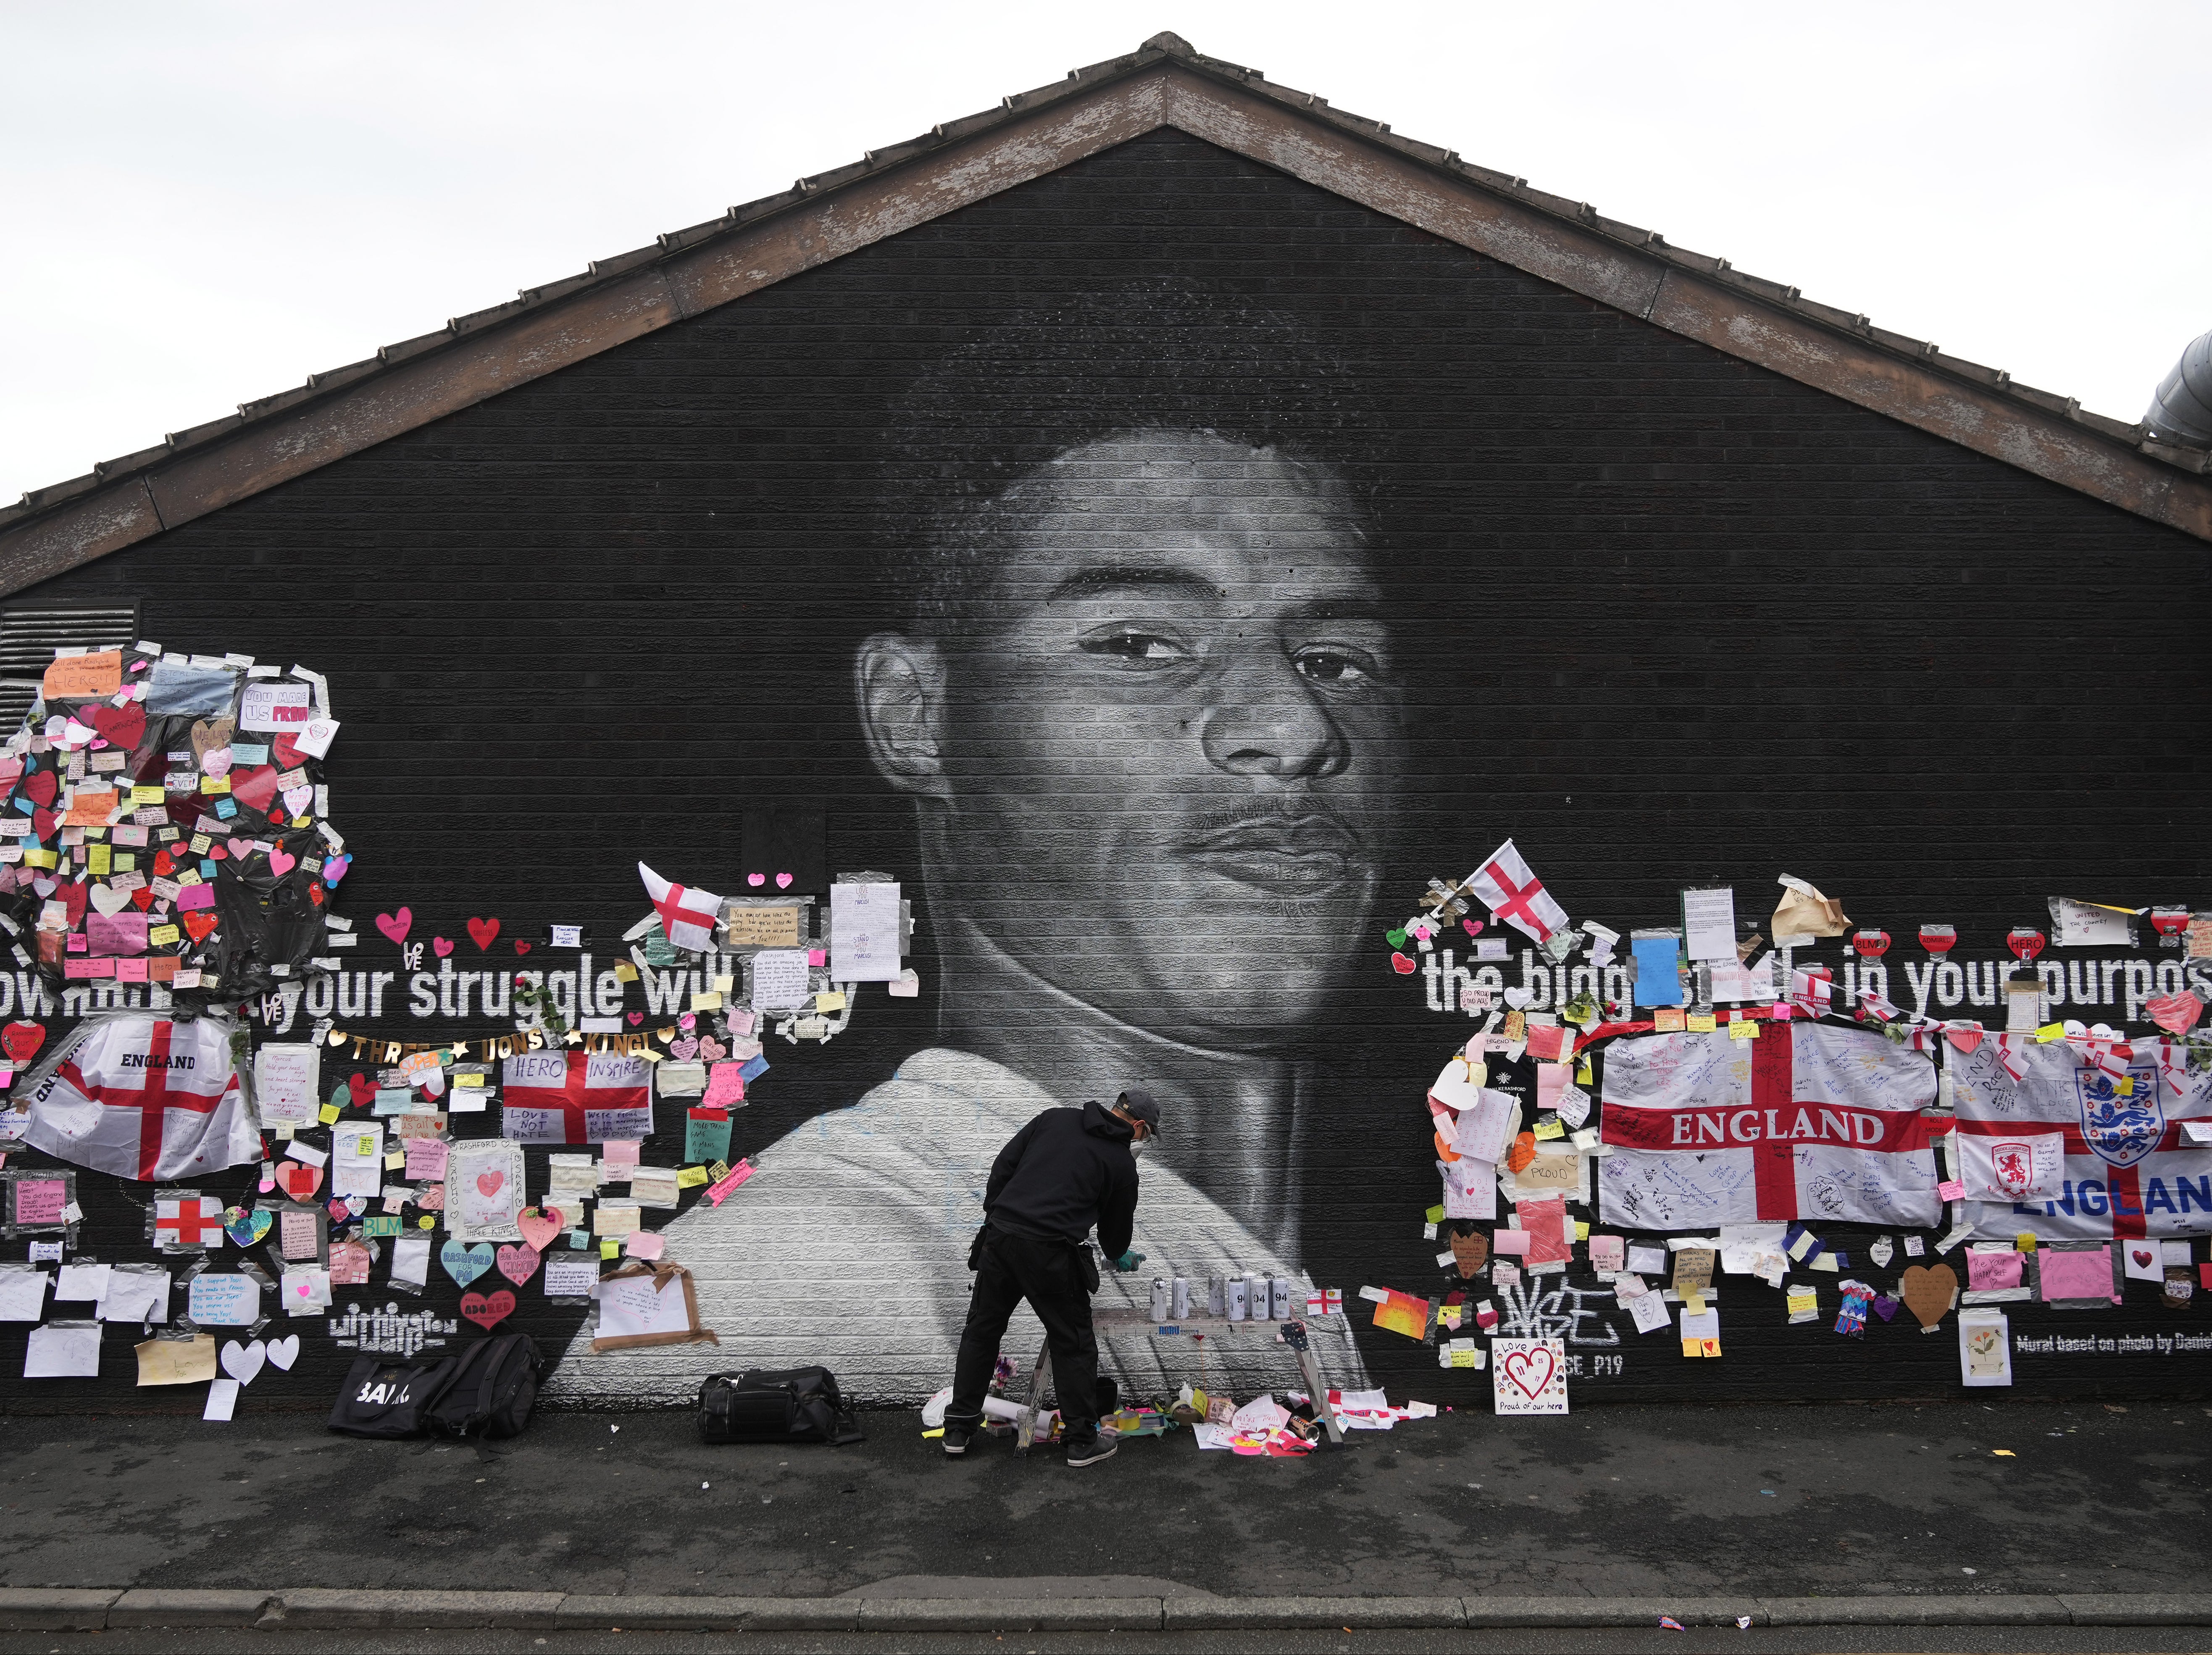 The Marcus Rashford mural is repaired after being defaced by vandals